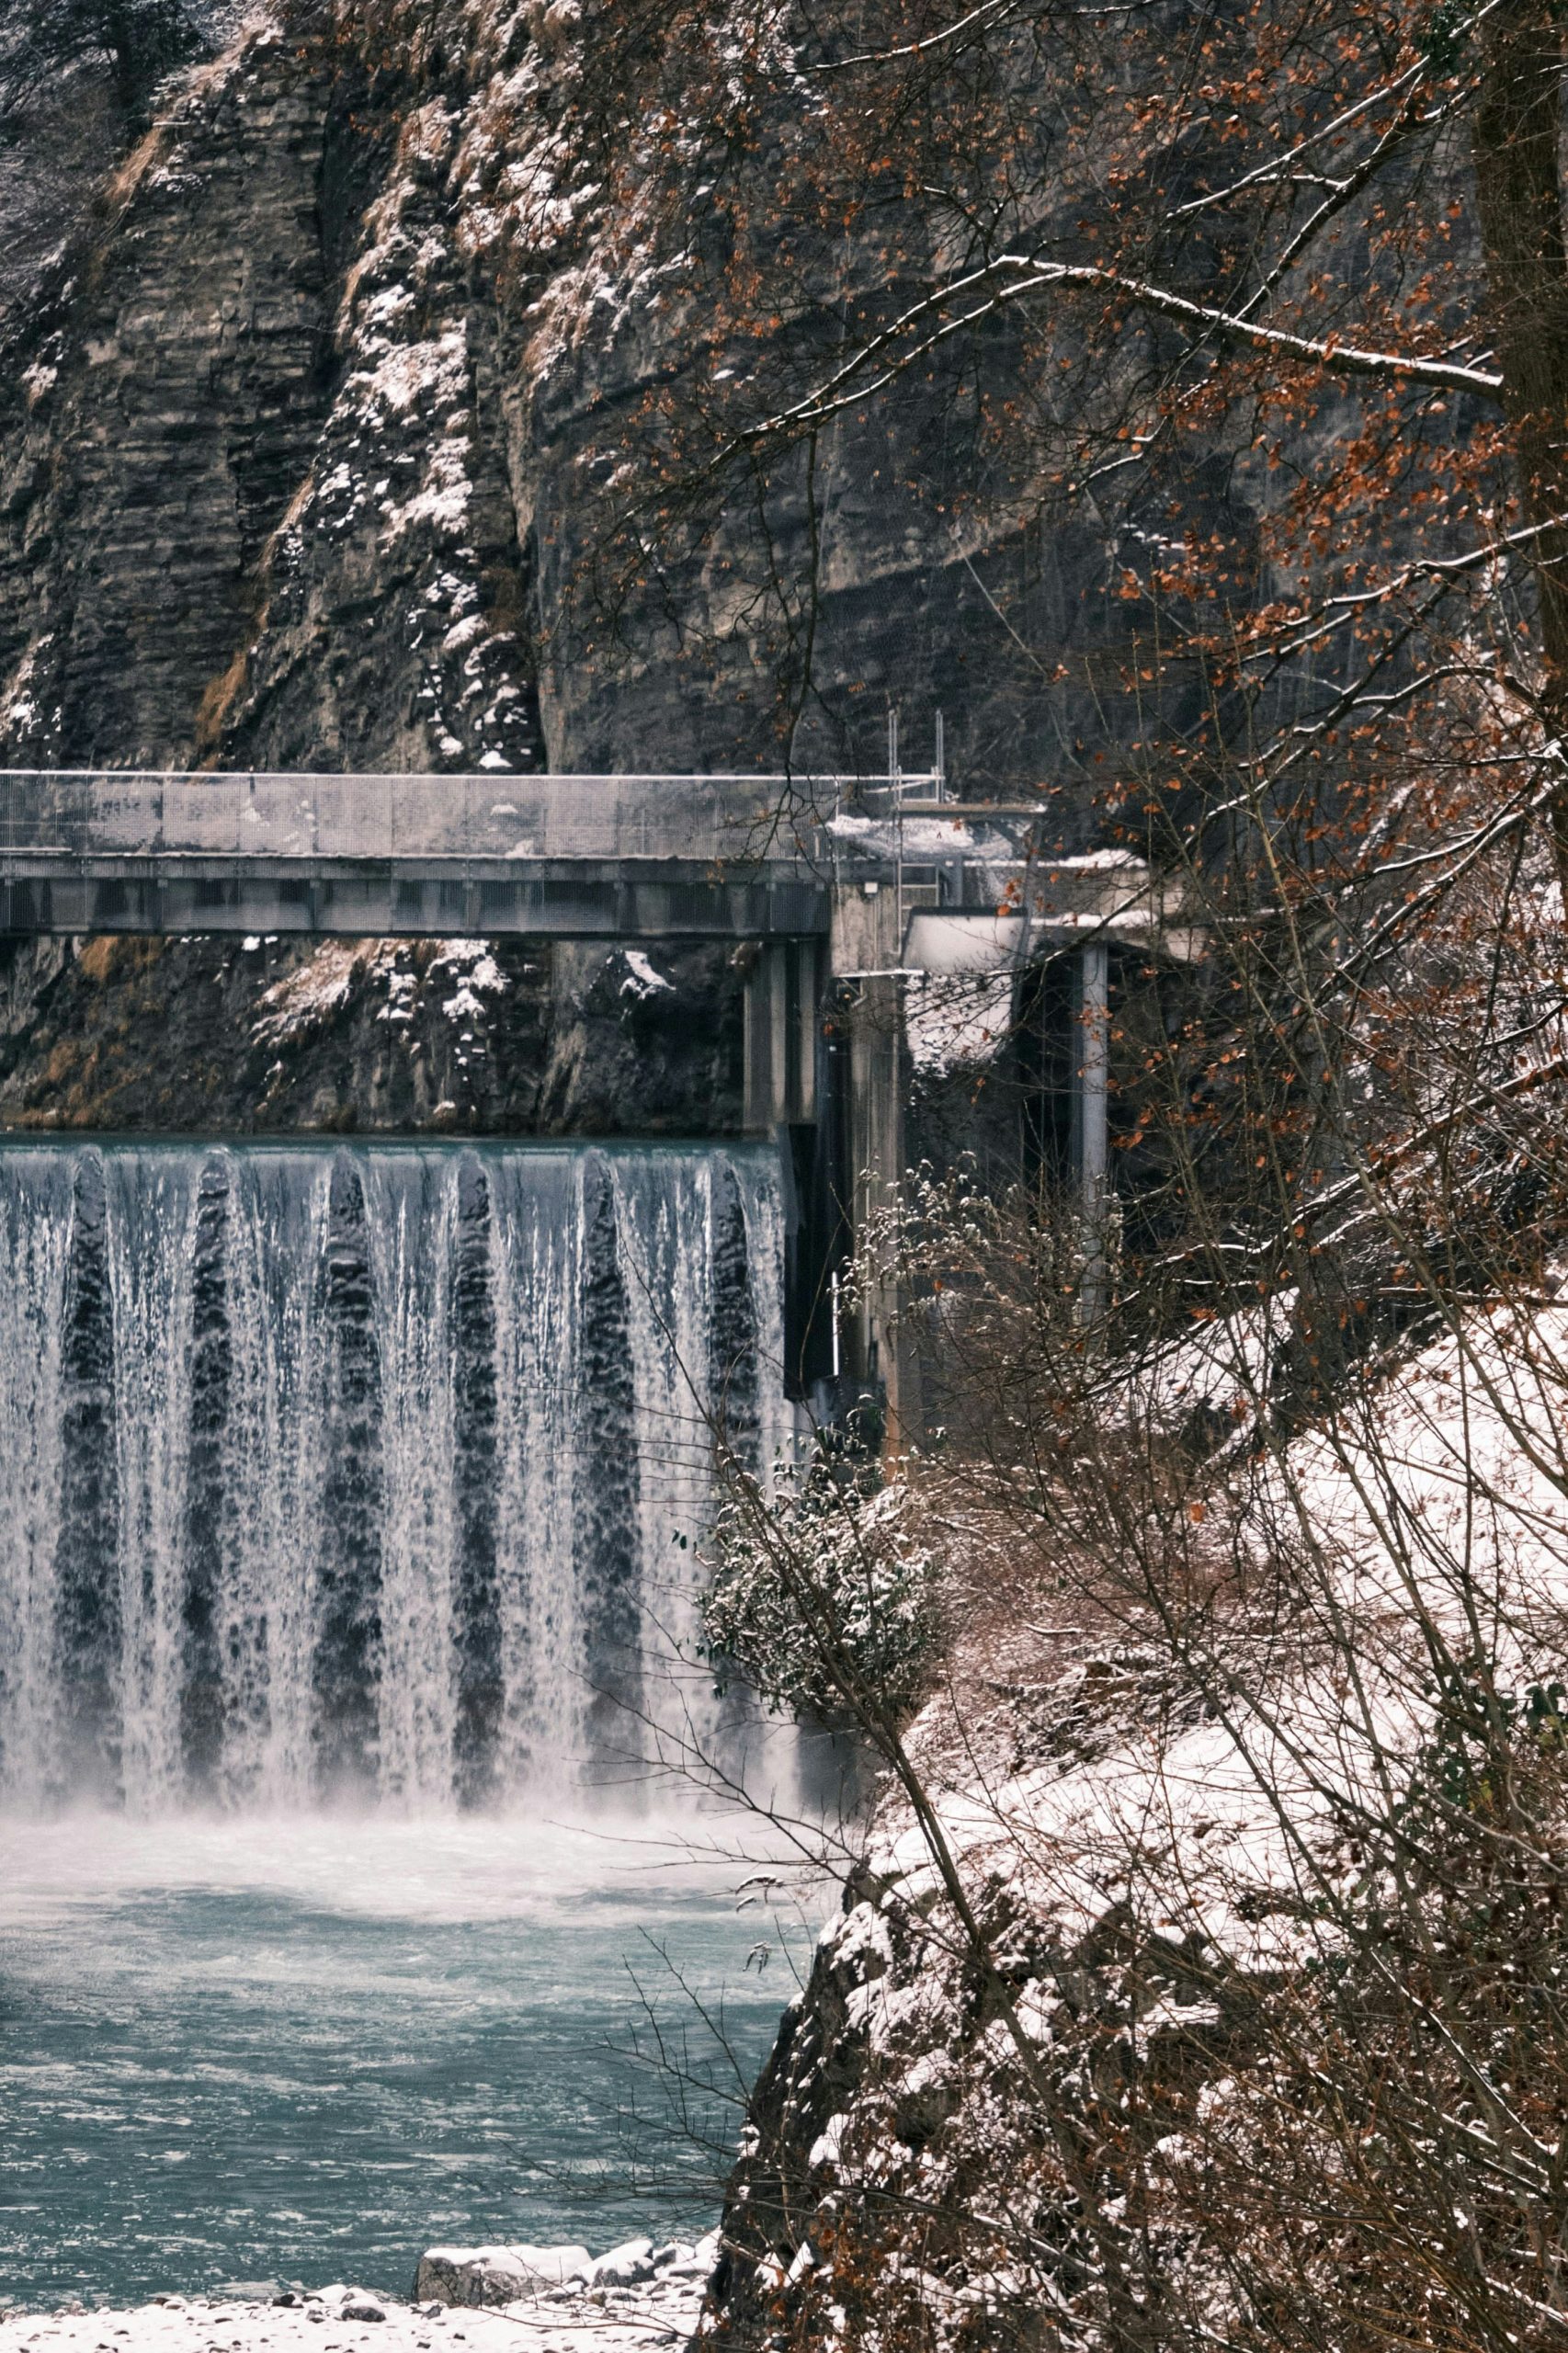 How Does Hydroelectric Power Work?